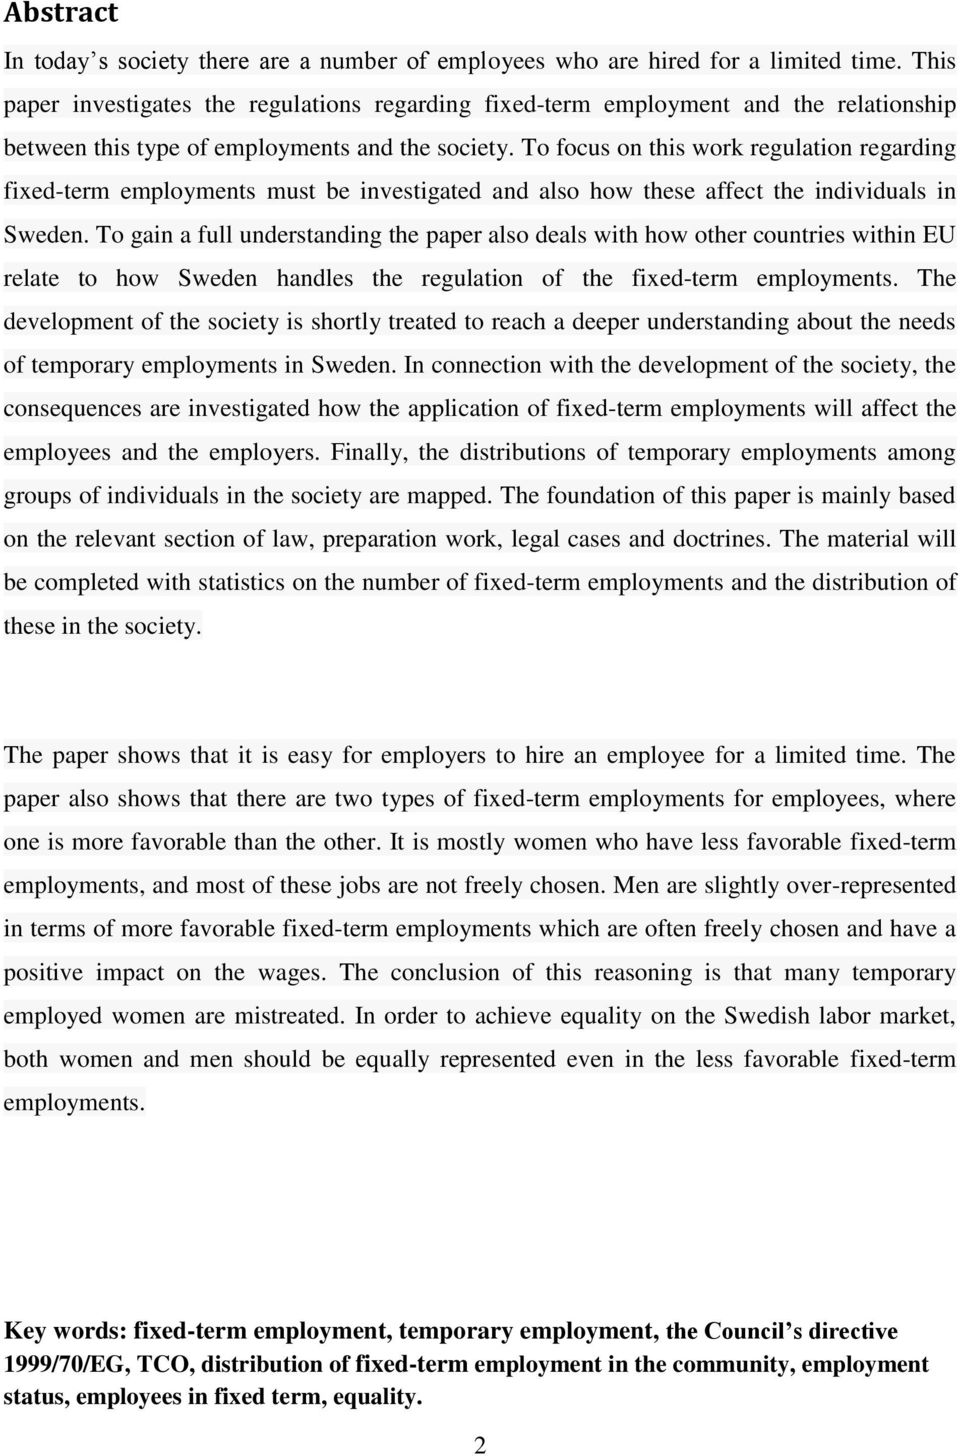 To focus on this work regulation regarding fixed-term employments must be investigated and also how these affect the individuals in Sweden.